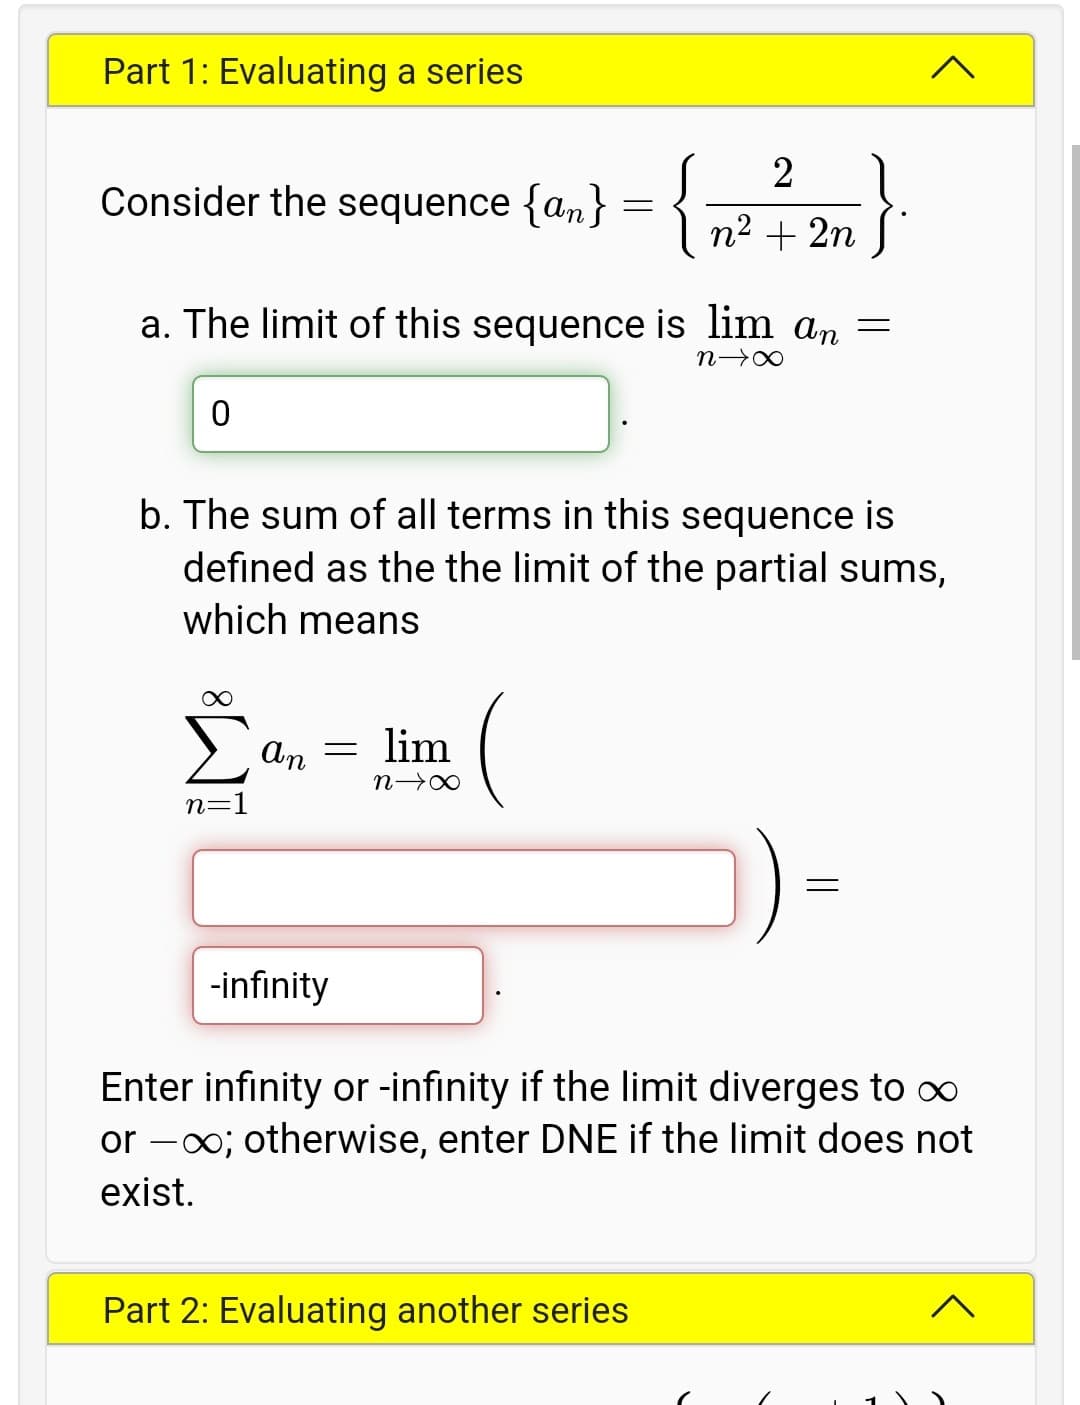 Part 1: Evaluating a series
- {}
2
Consider the sequence {an}
I n2 + 2n S
a. The limit of this sequence is lim an =
b. The sum of all terms in this sequence is
defined as the the limit of the partial sums,
which means
> an =
lim
n 0
n=1
-infinity
Enter infinity or -infinity if the limit diverges to o∞
or -00; otherwise, enter DNE if the limit does not
exist.
Part 2: Evaluating another series
